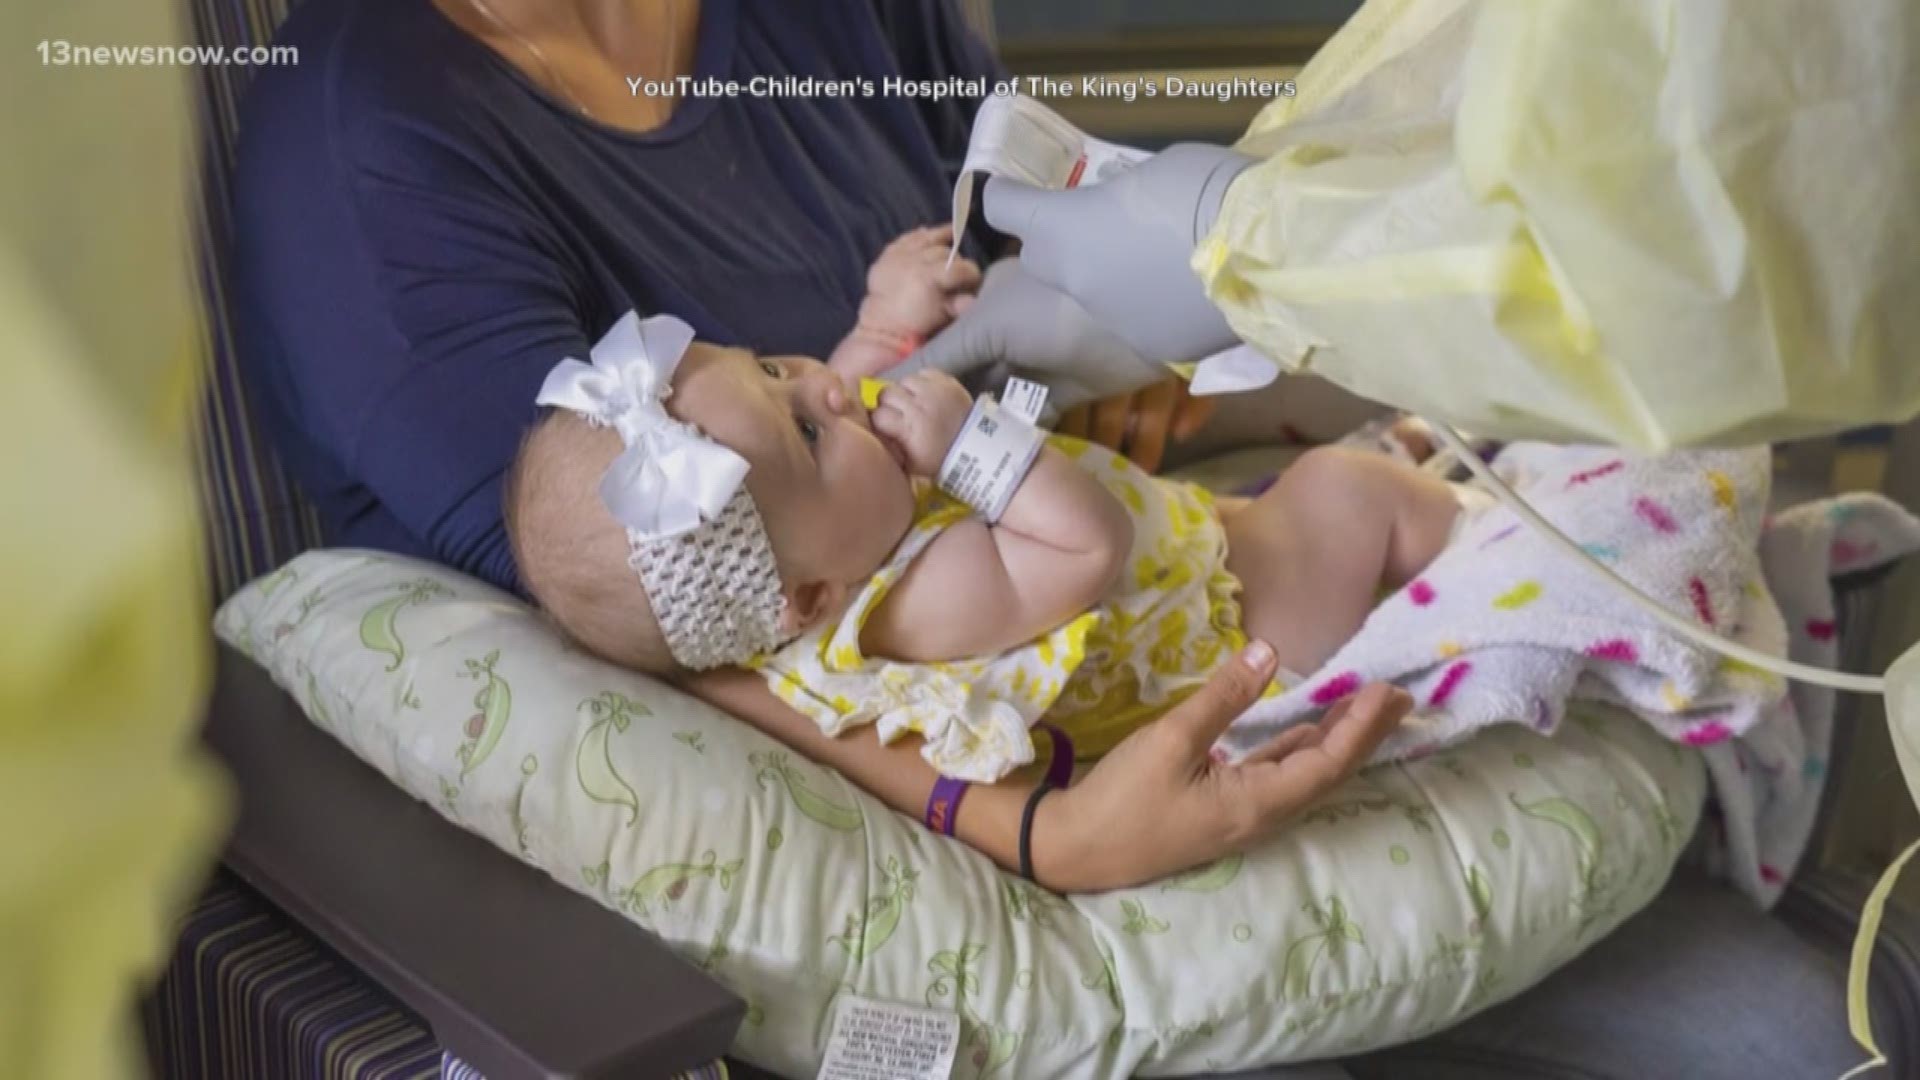 A 3-month-old girl at CHKD is the first child in Virginia, and one of the first in the country, to receive a new gene therapy drug just approved by the FDA. Kaeli Price, from North Carolina, was diagnosed with spinal muscular atrophy at 8-weeks-old.